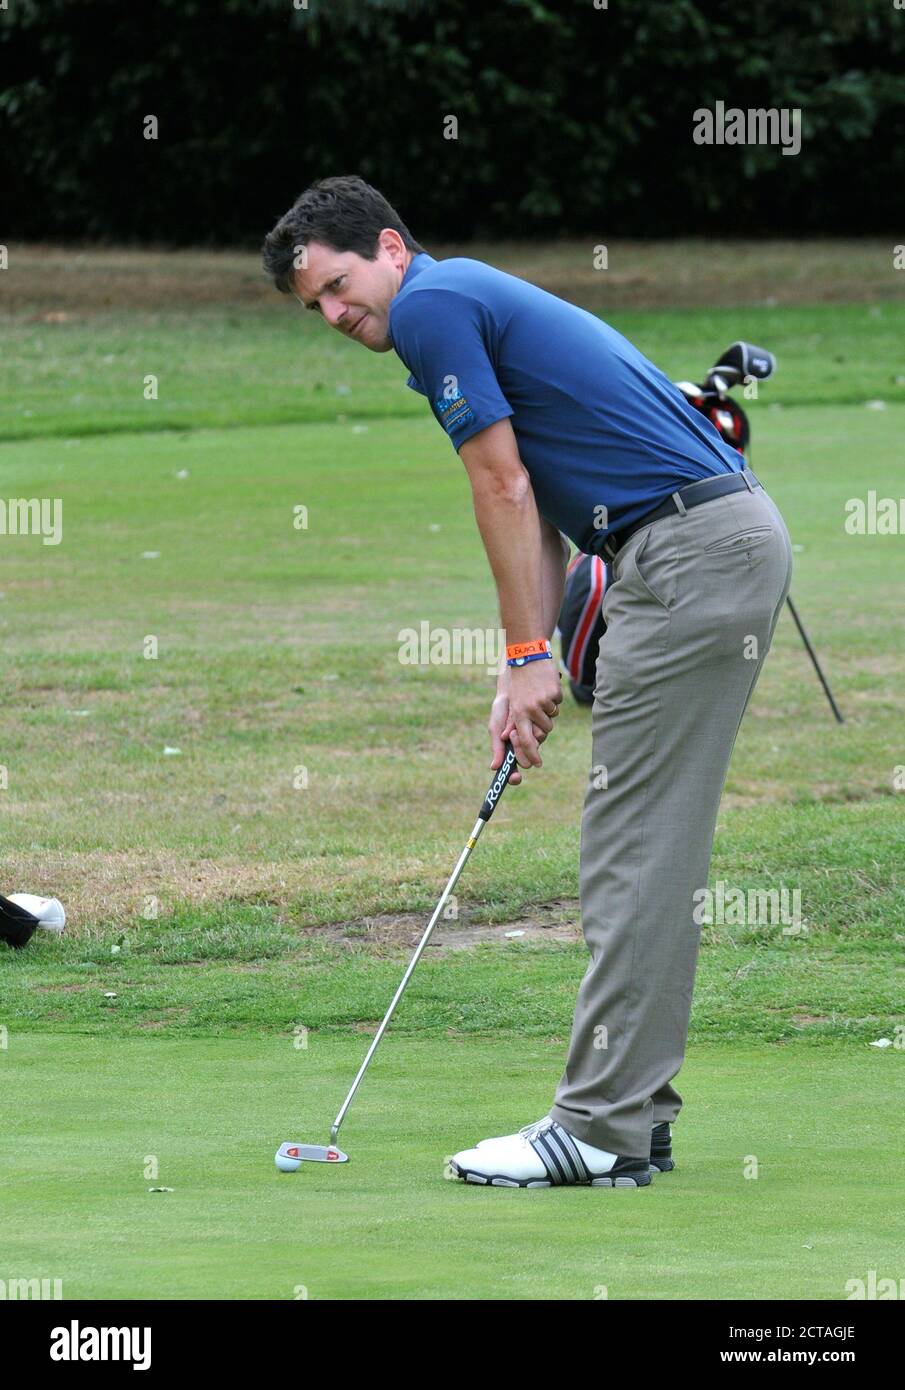 CHISWICK,LONDON,UK: JULY 16th 2010.  Tennis star Tim Henman participates in the Leuka Charity Mini-Masters Golf at the Dukes Meadows Golf Course Chisw Stock Photo